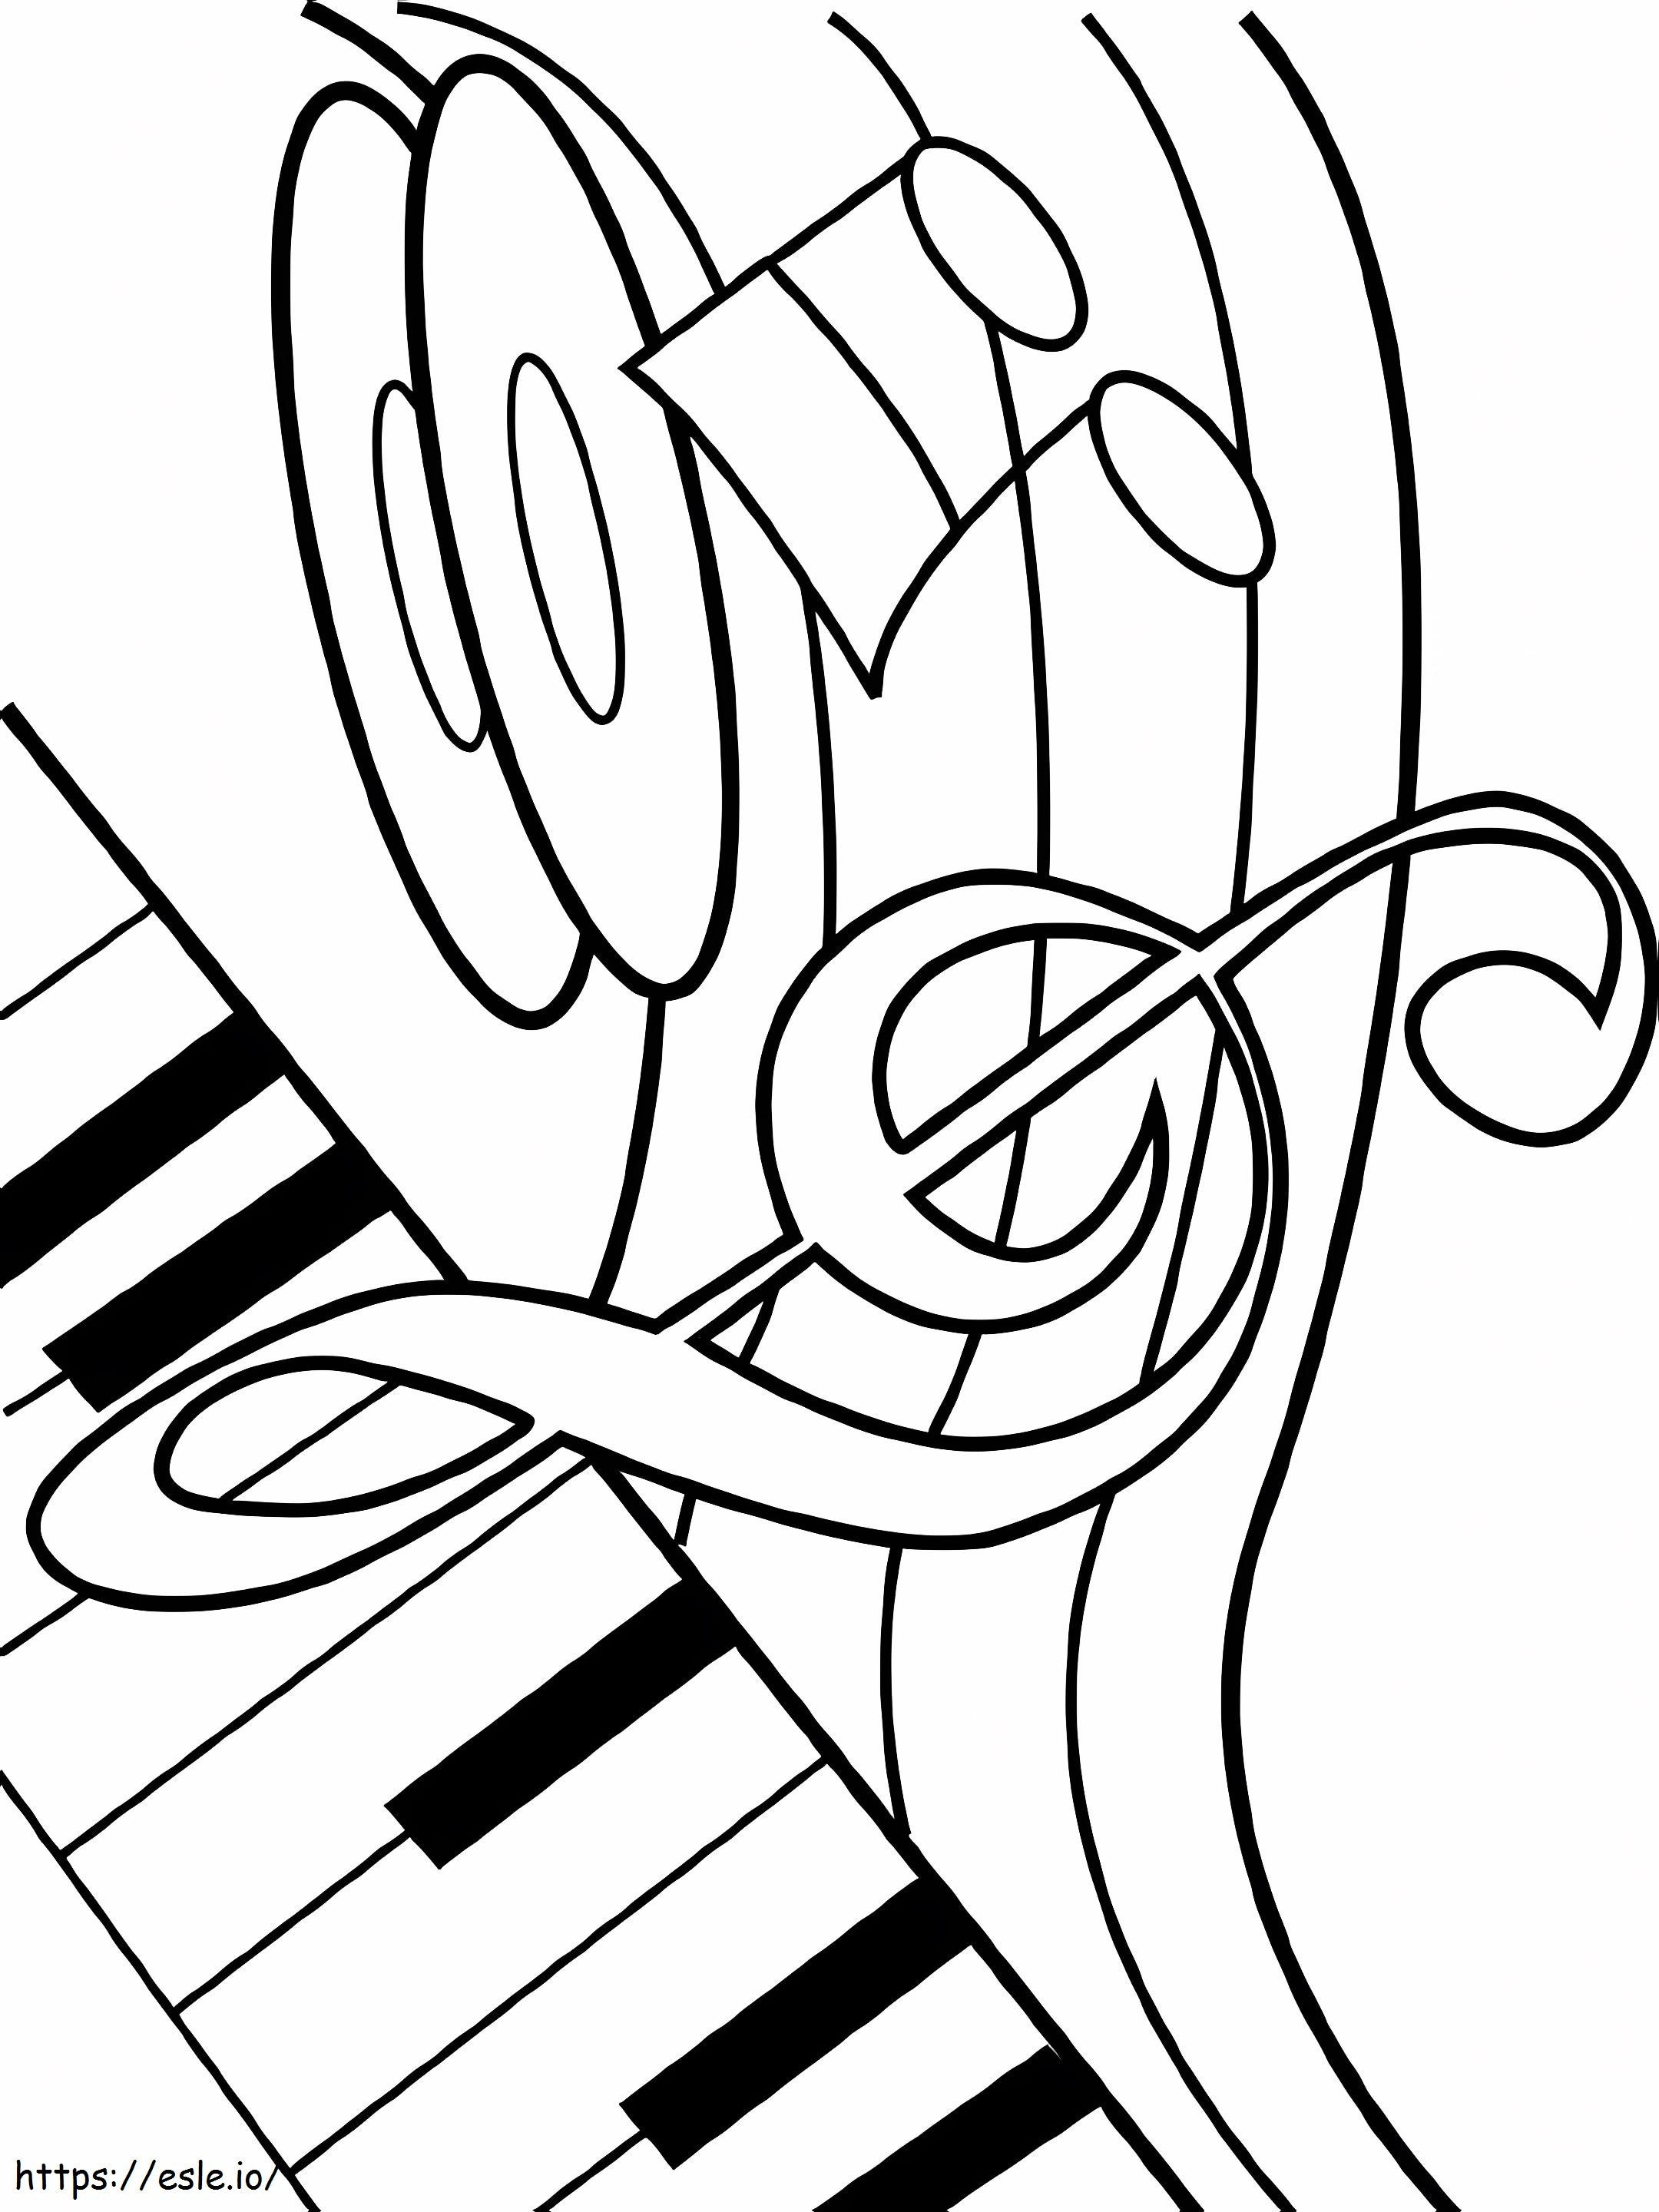 General Music Notes coloring page